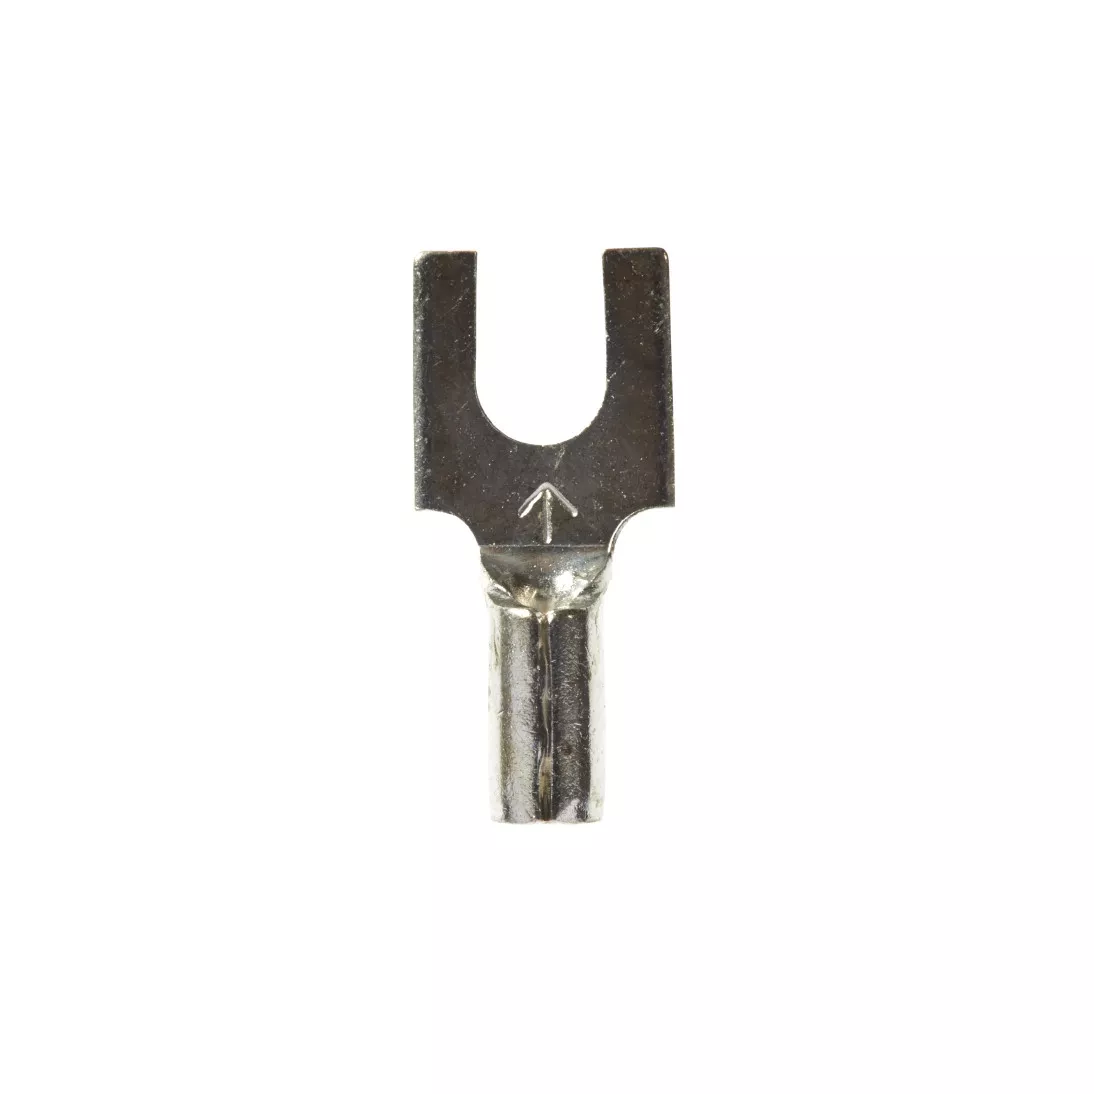 3M™ Scotchlok™ Block Fork, Non-Insulated Butted Seam MU18-6FBK, Stud
Size 6, suitable for use in a terminal block, 1000/Case